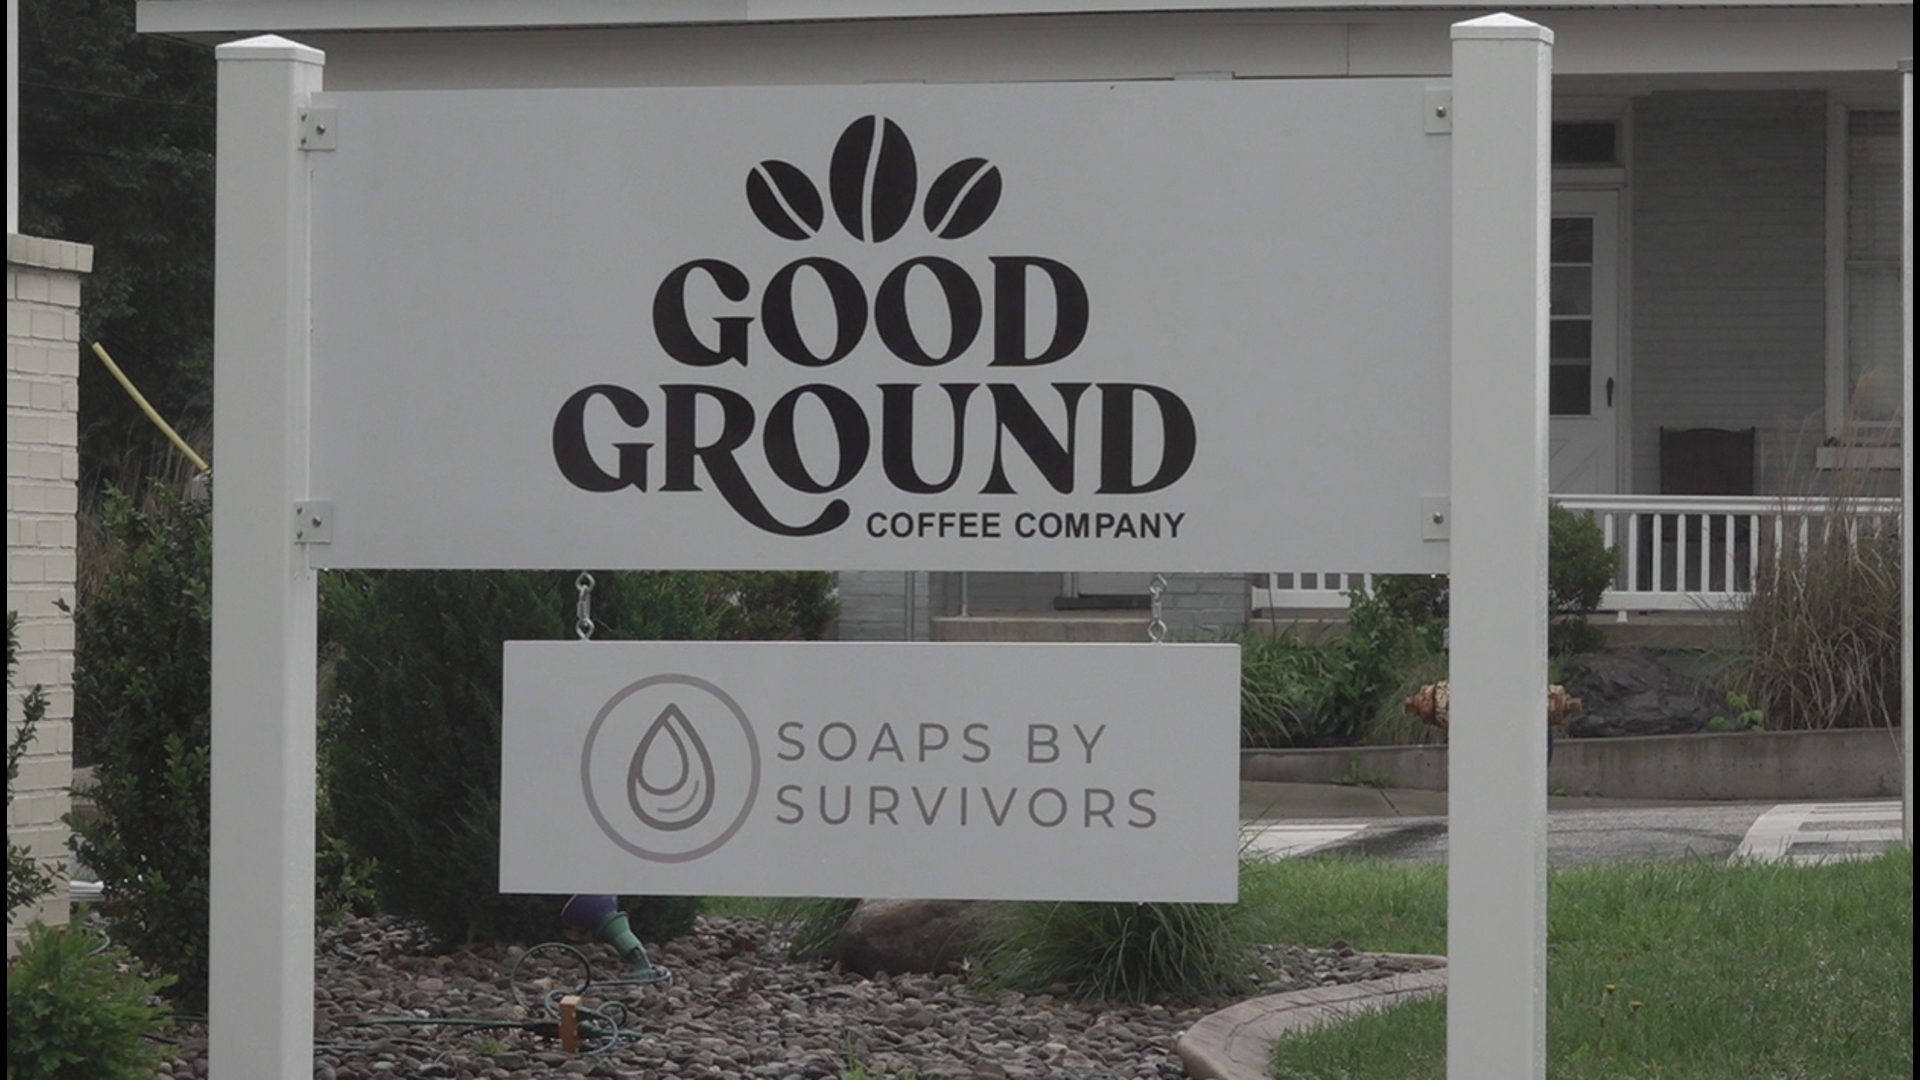 Good Ground Coffee Company opened to the public on Tuesday, May 14.